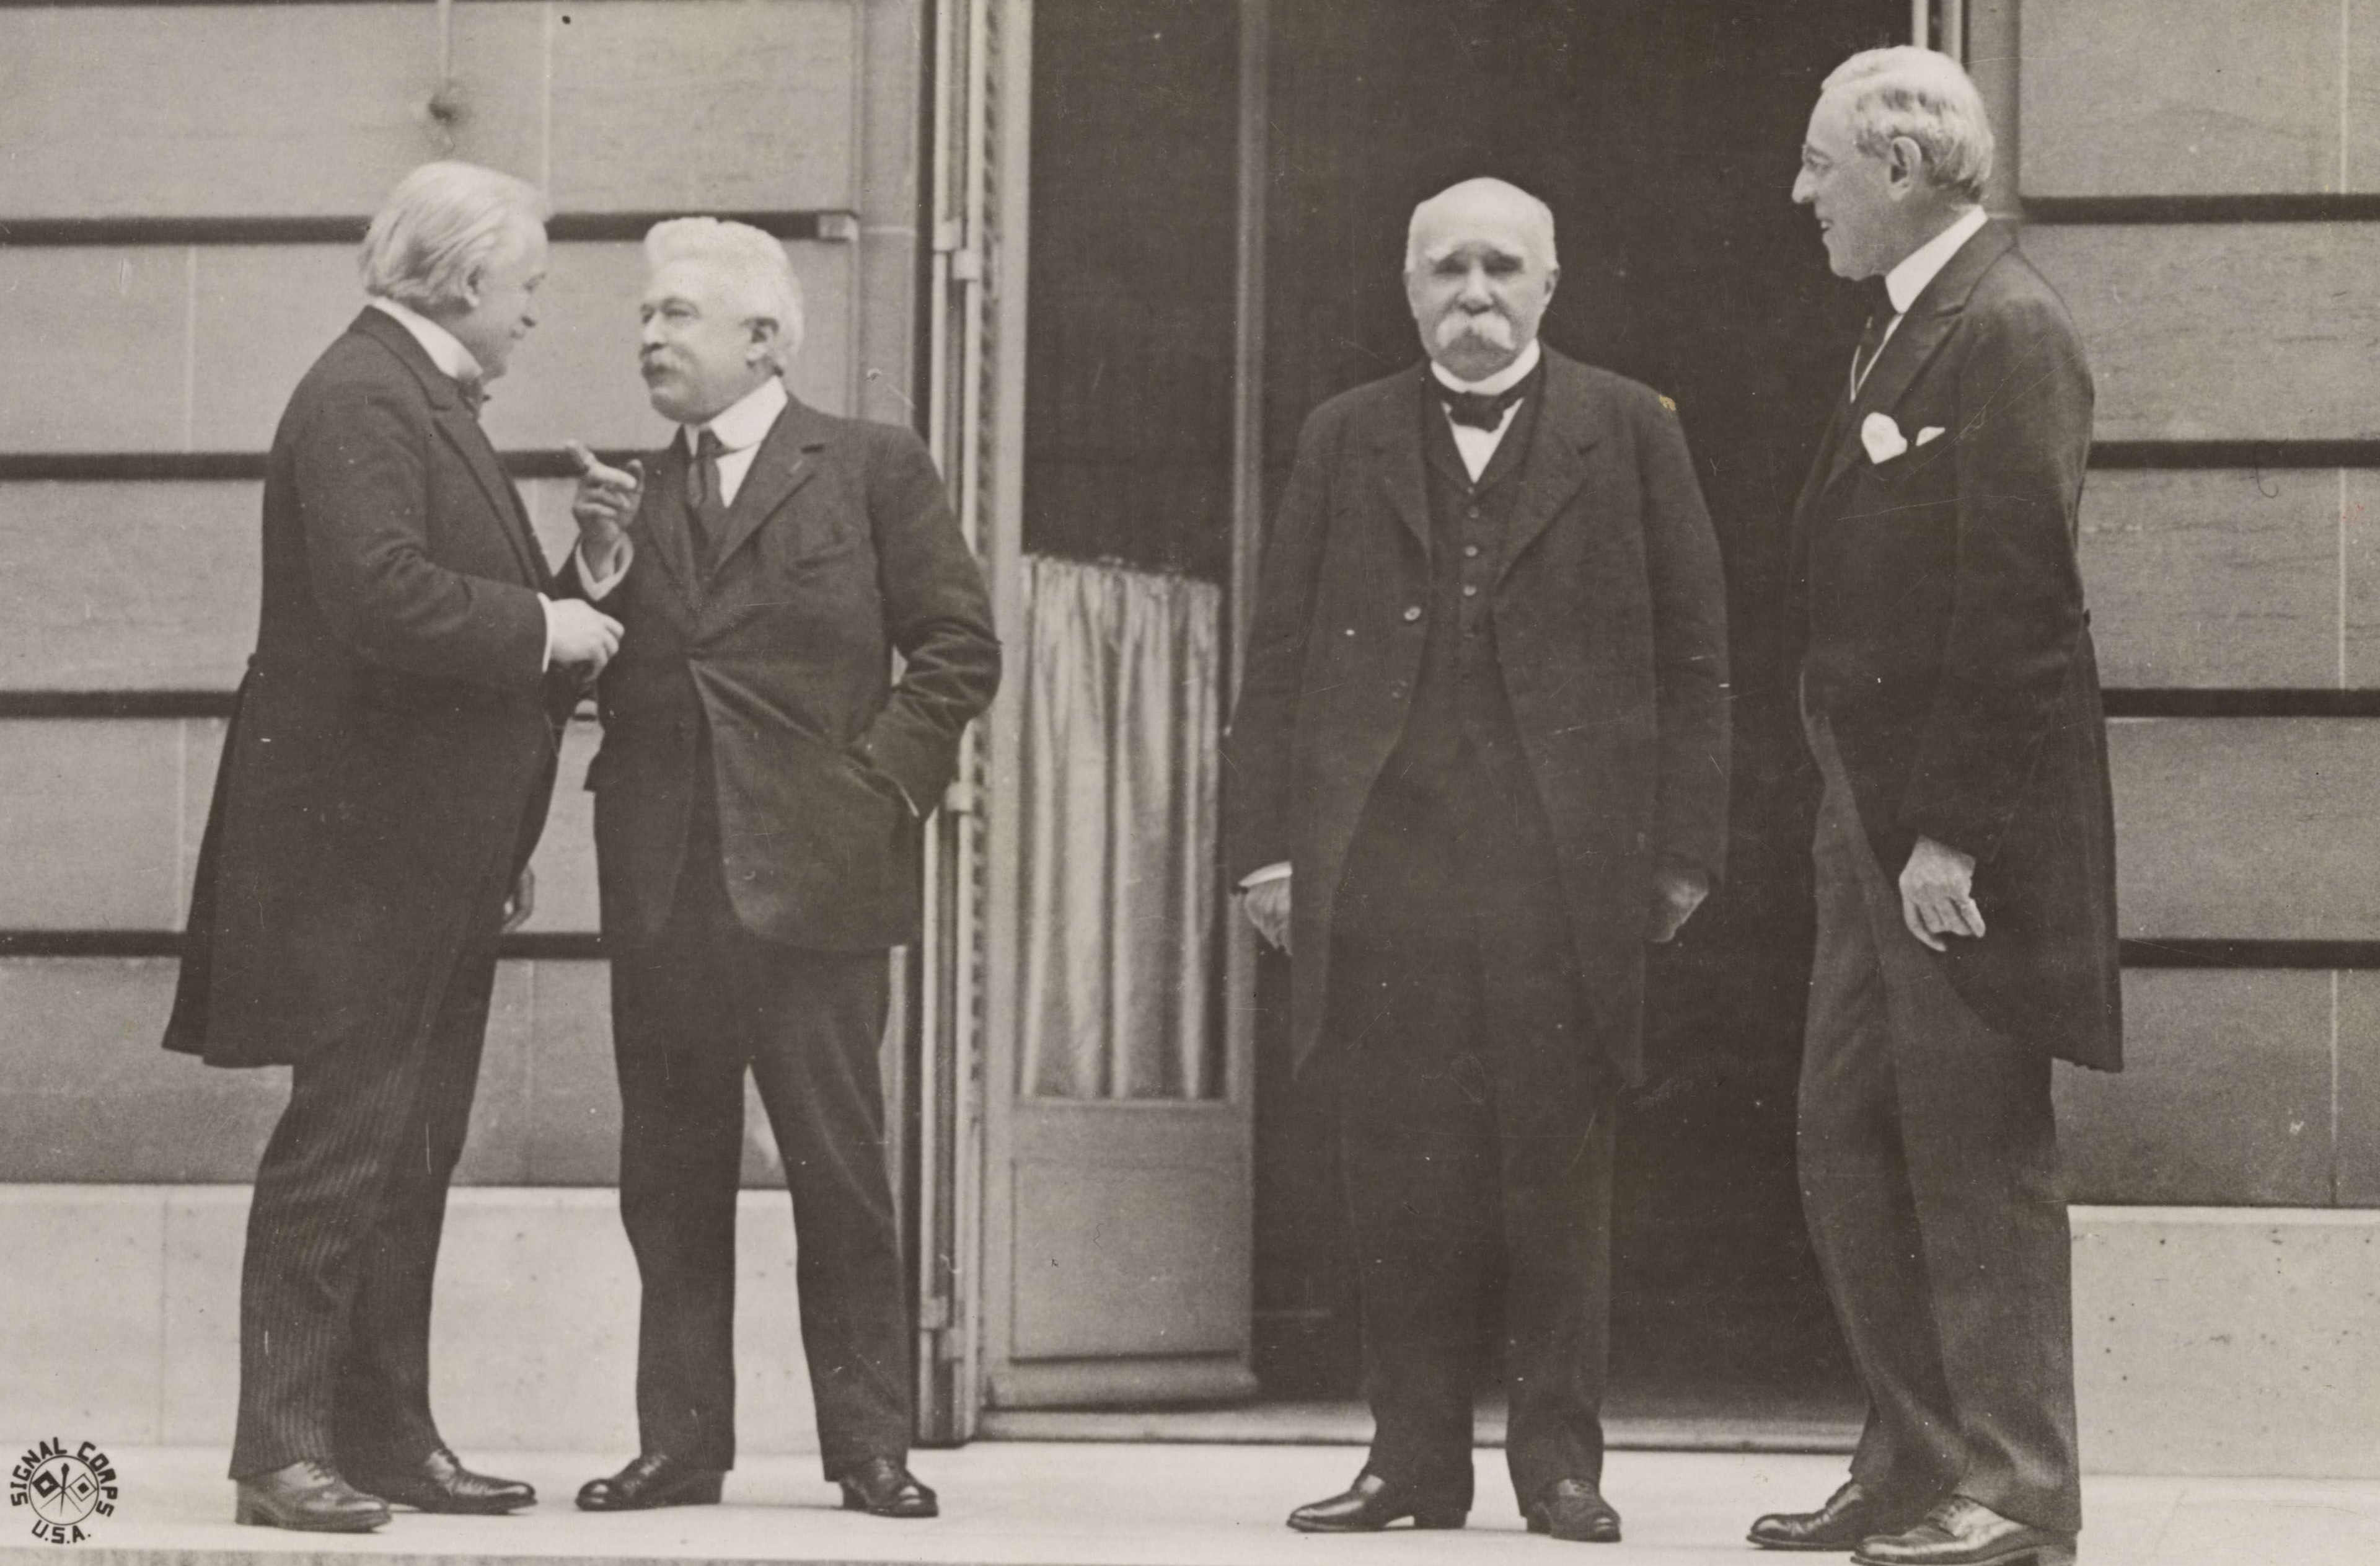 Council of Four at the Paris Peace Conference